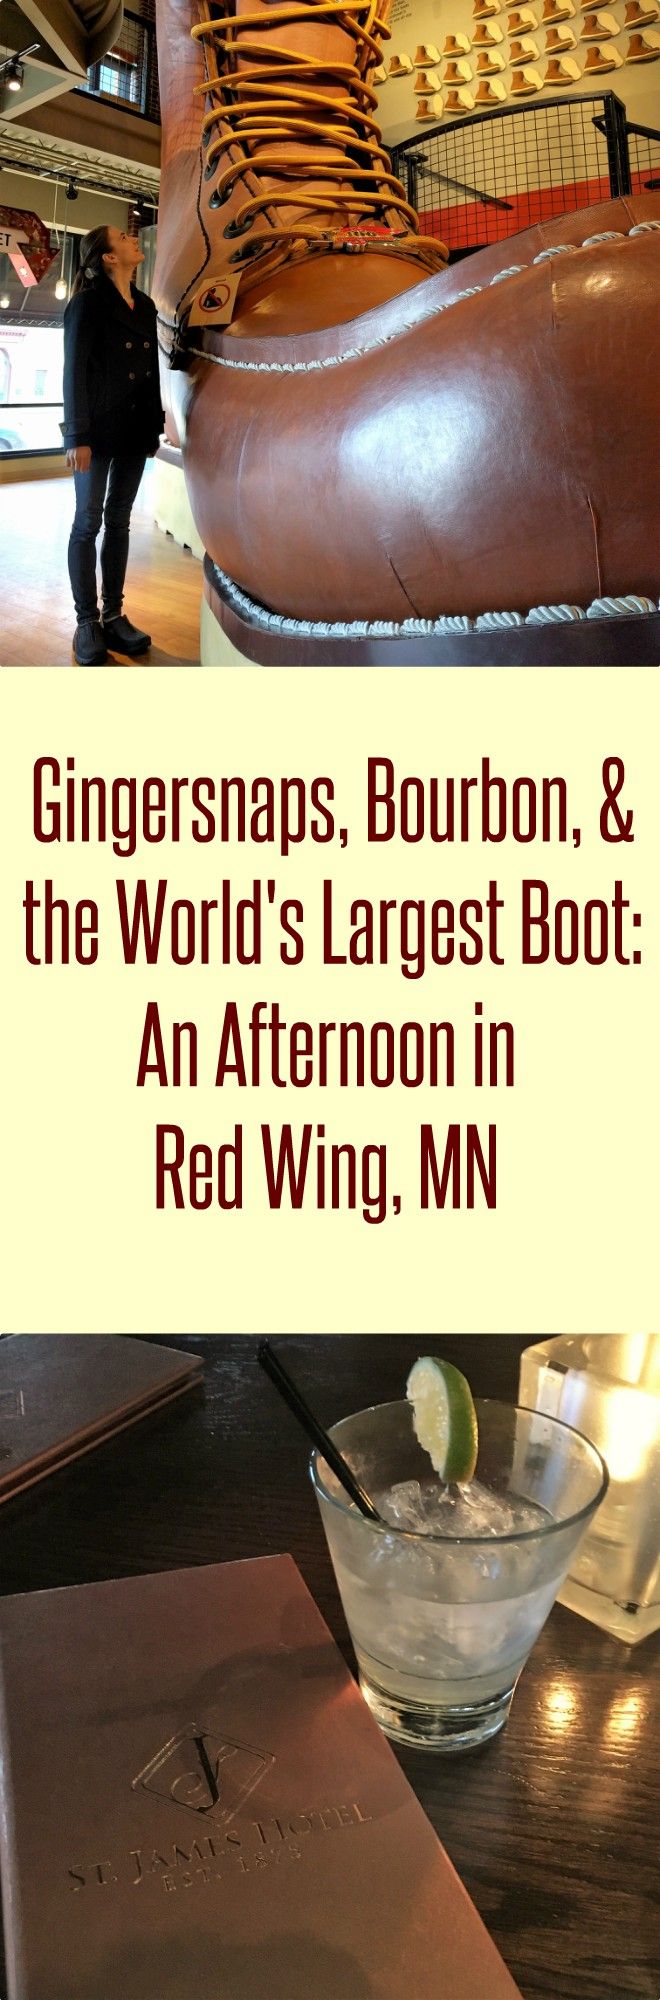 Gingersnaps, Bourbon, & the World's Largest Boot: An Afternoon in Red Wing, MN